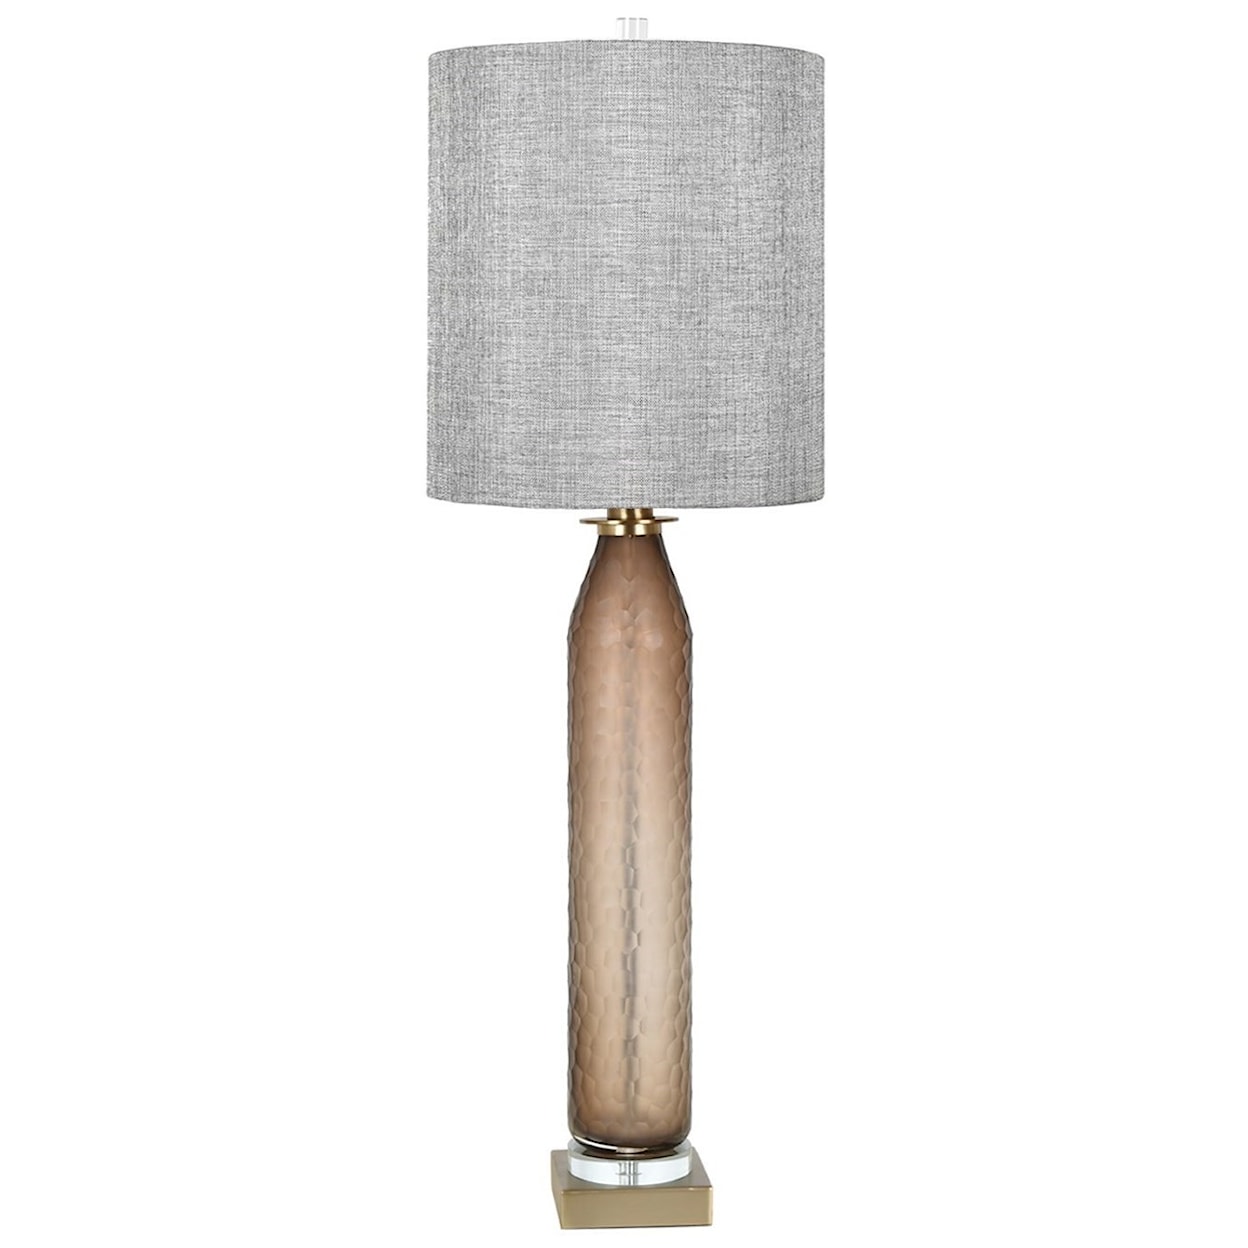 Crestview Collection Lighting Olivia Table Lamp